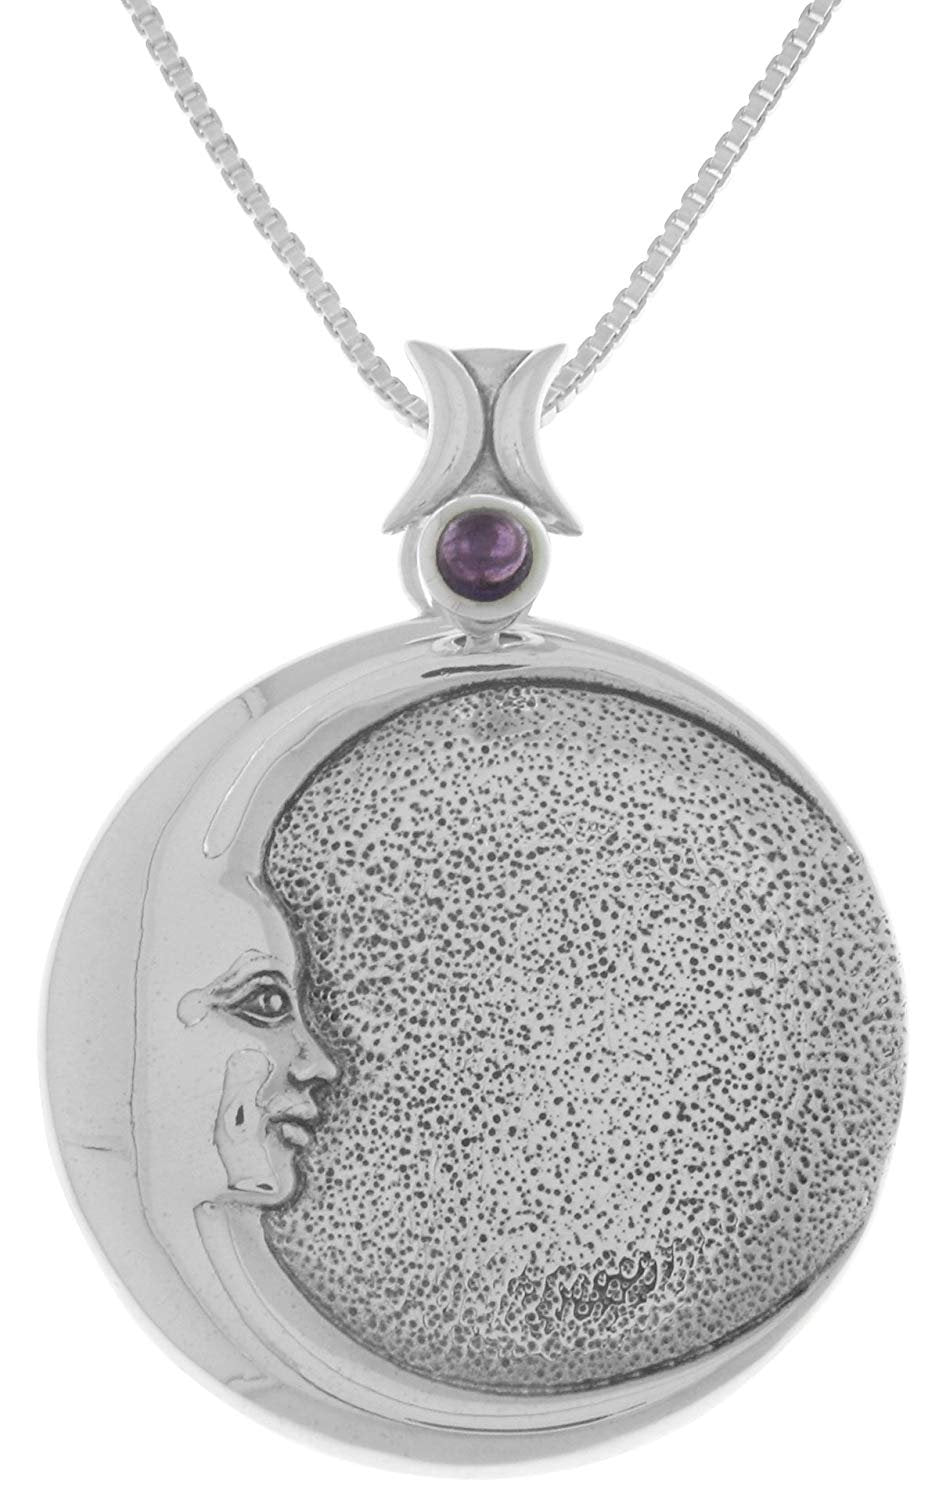 Jewelry Trends Sterling Silver Goddess Crescent Moon Eclipse Pendant with Amethyst on 18 Inch Necklace